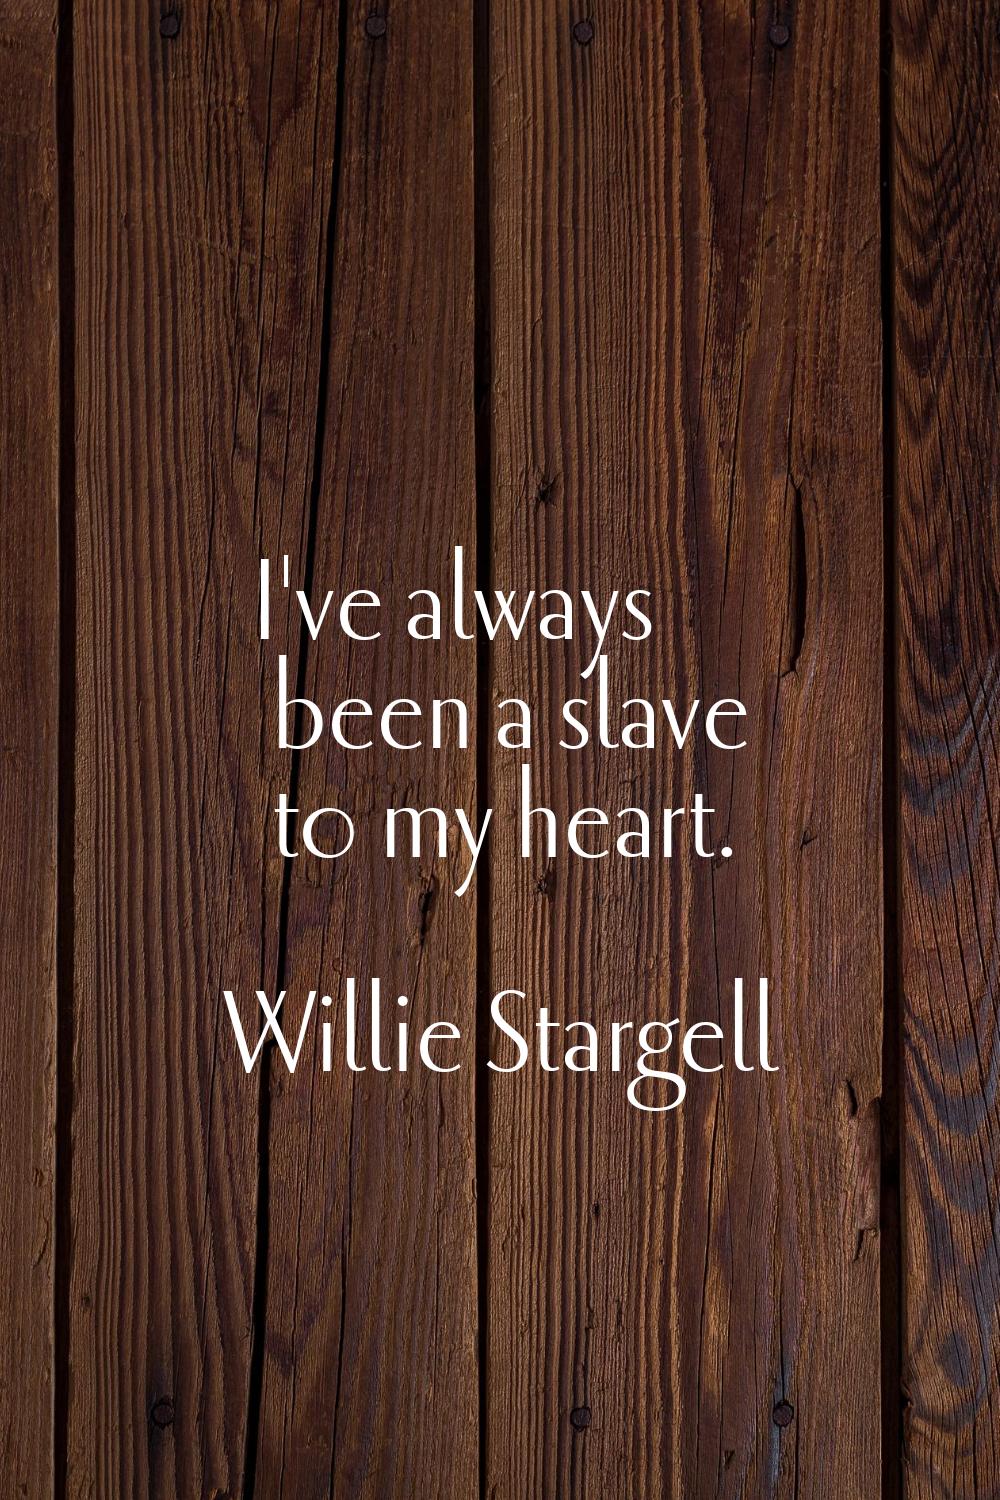 I've always been a slave to my heart.